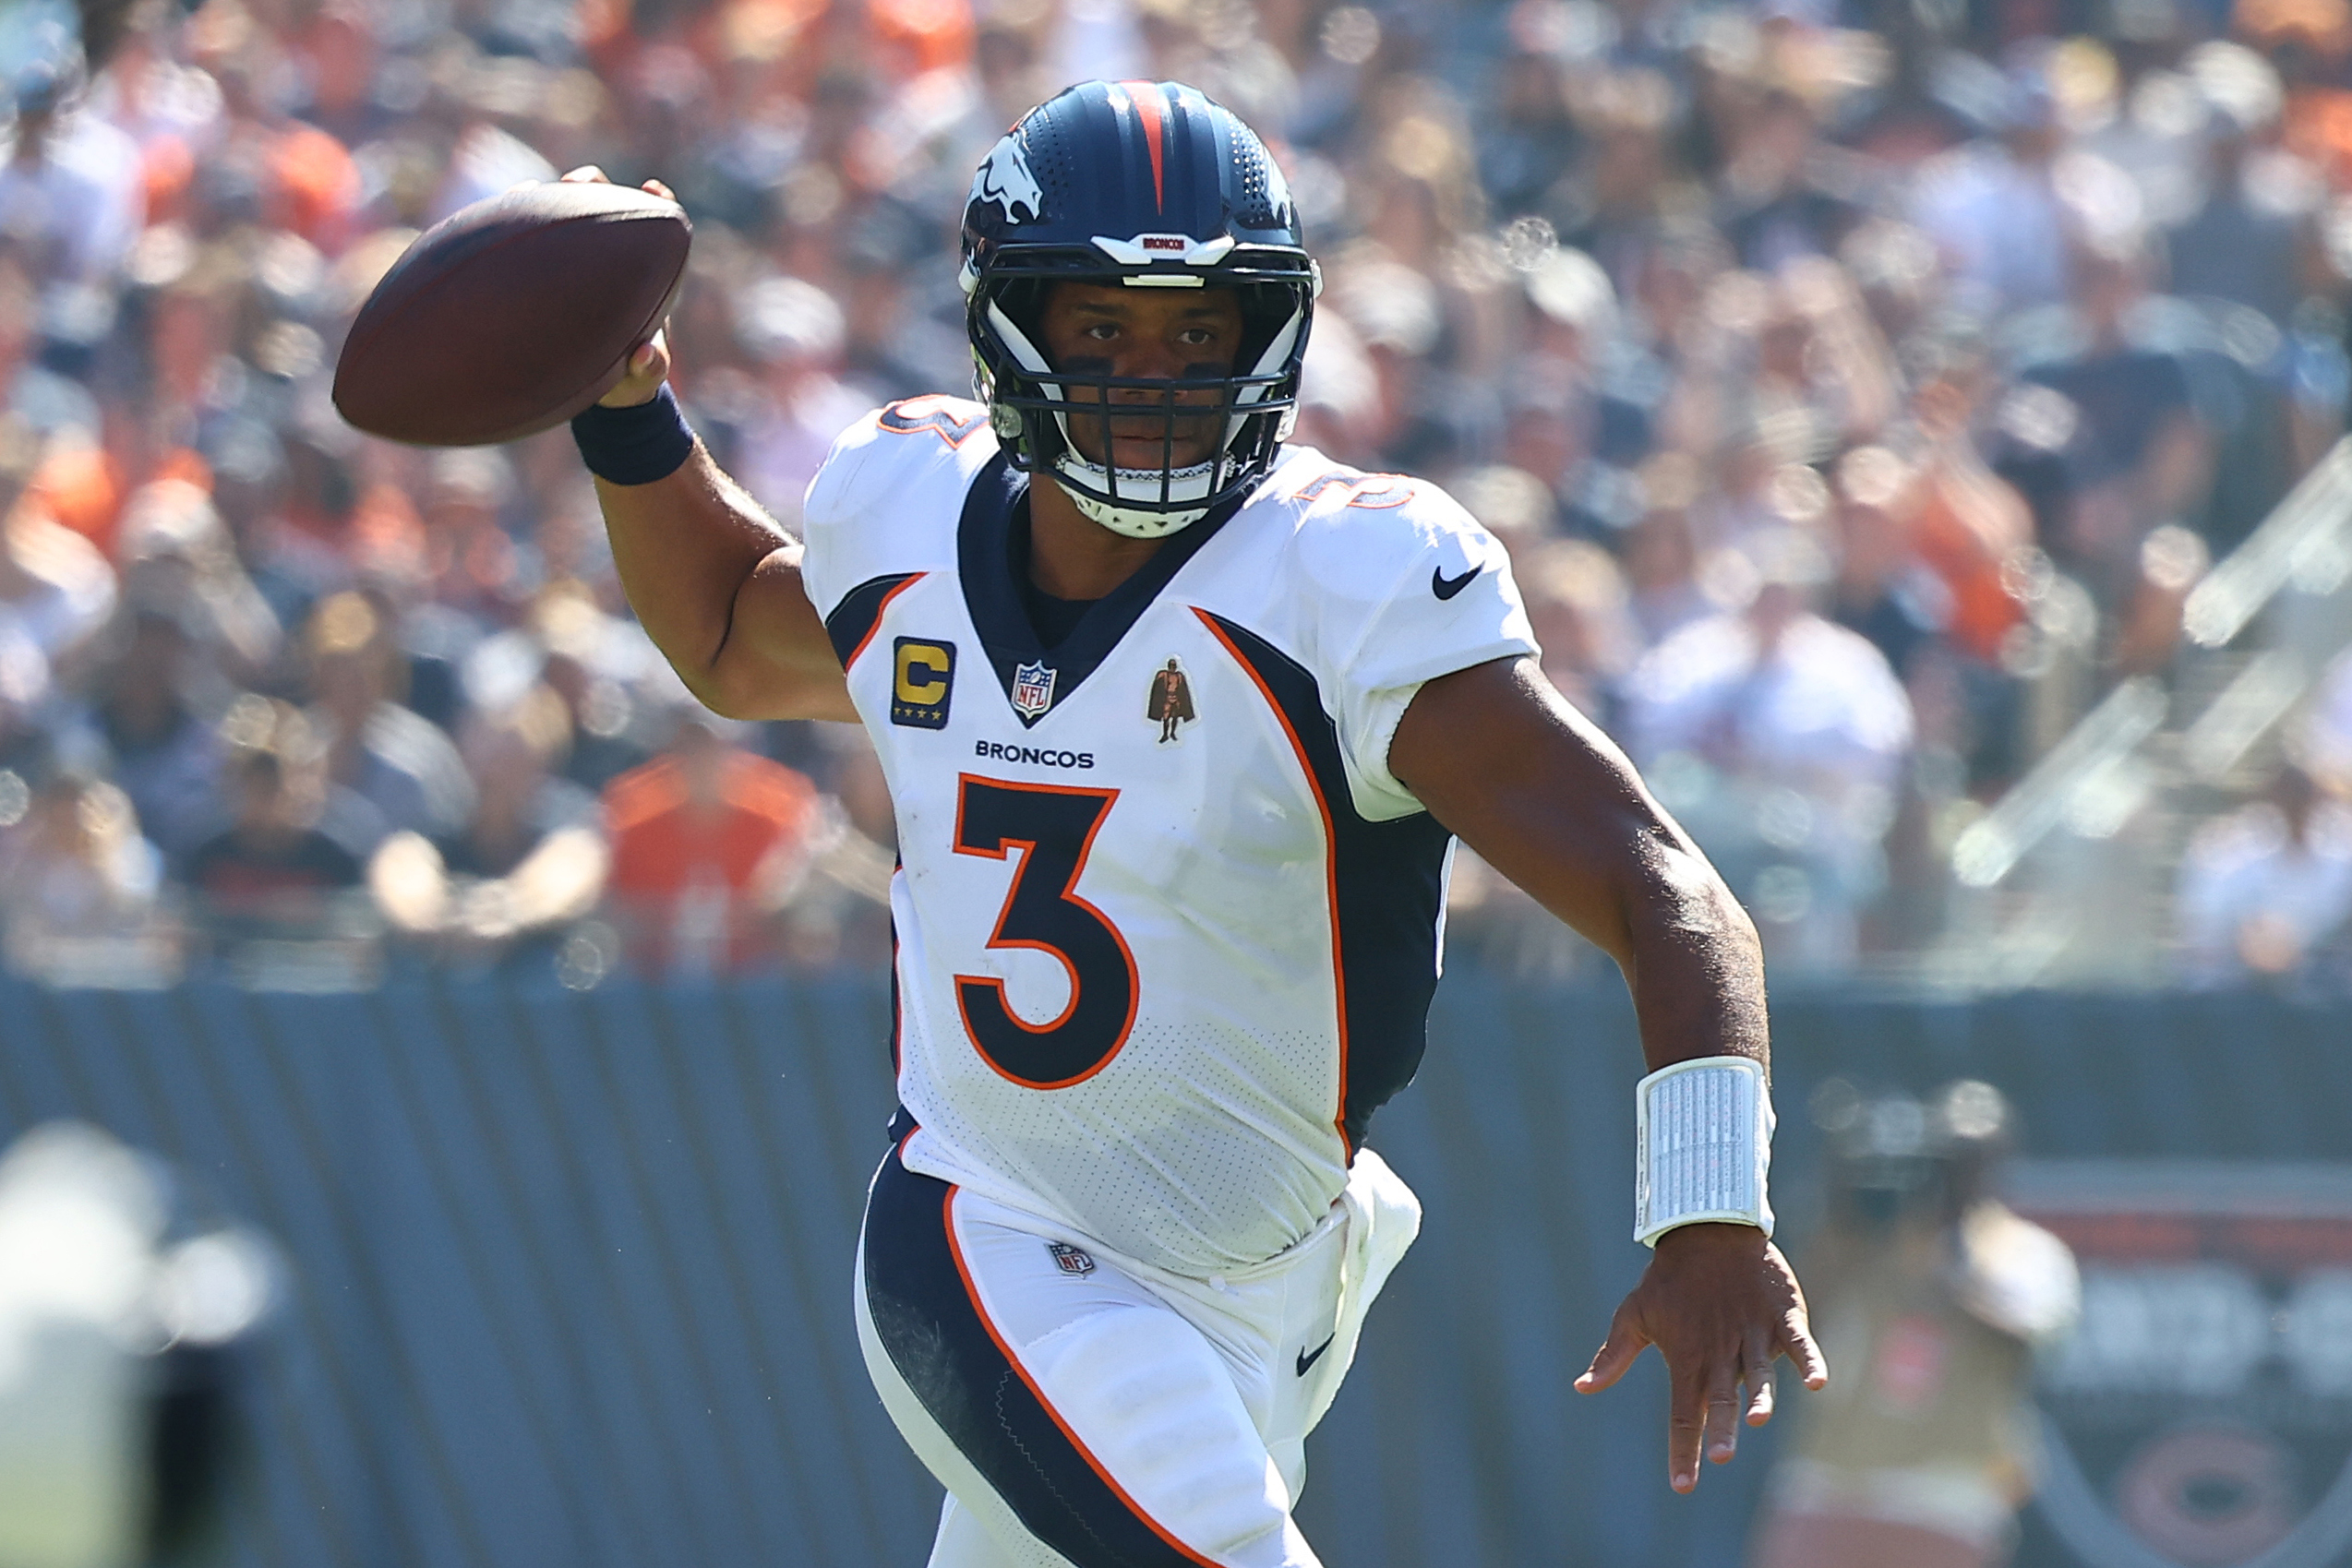 Broncos vs. Jaguars score, results: Russell Wilson leads comeback